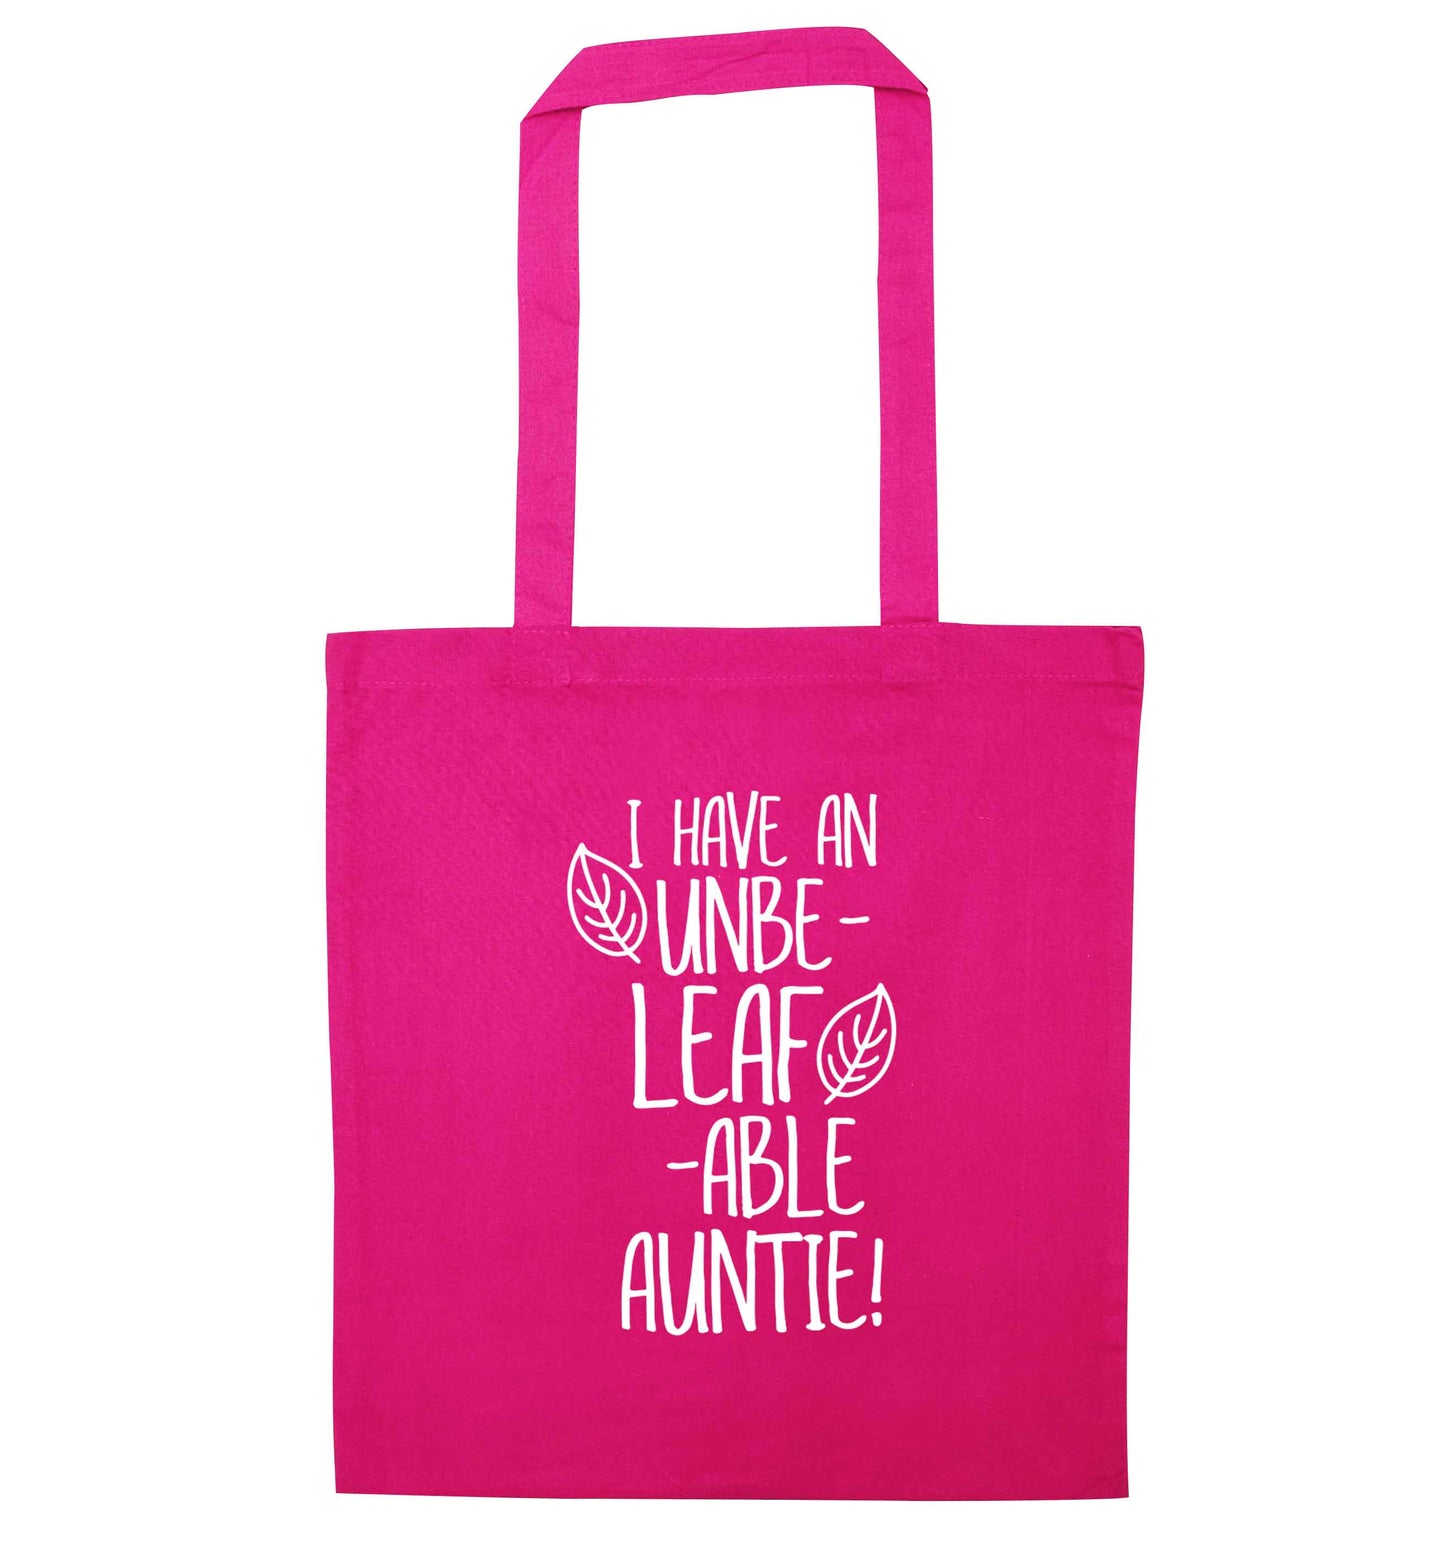 I have an unbe-leaf-able auntie pink tote bag